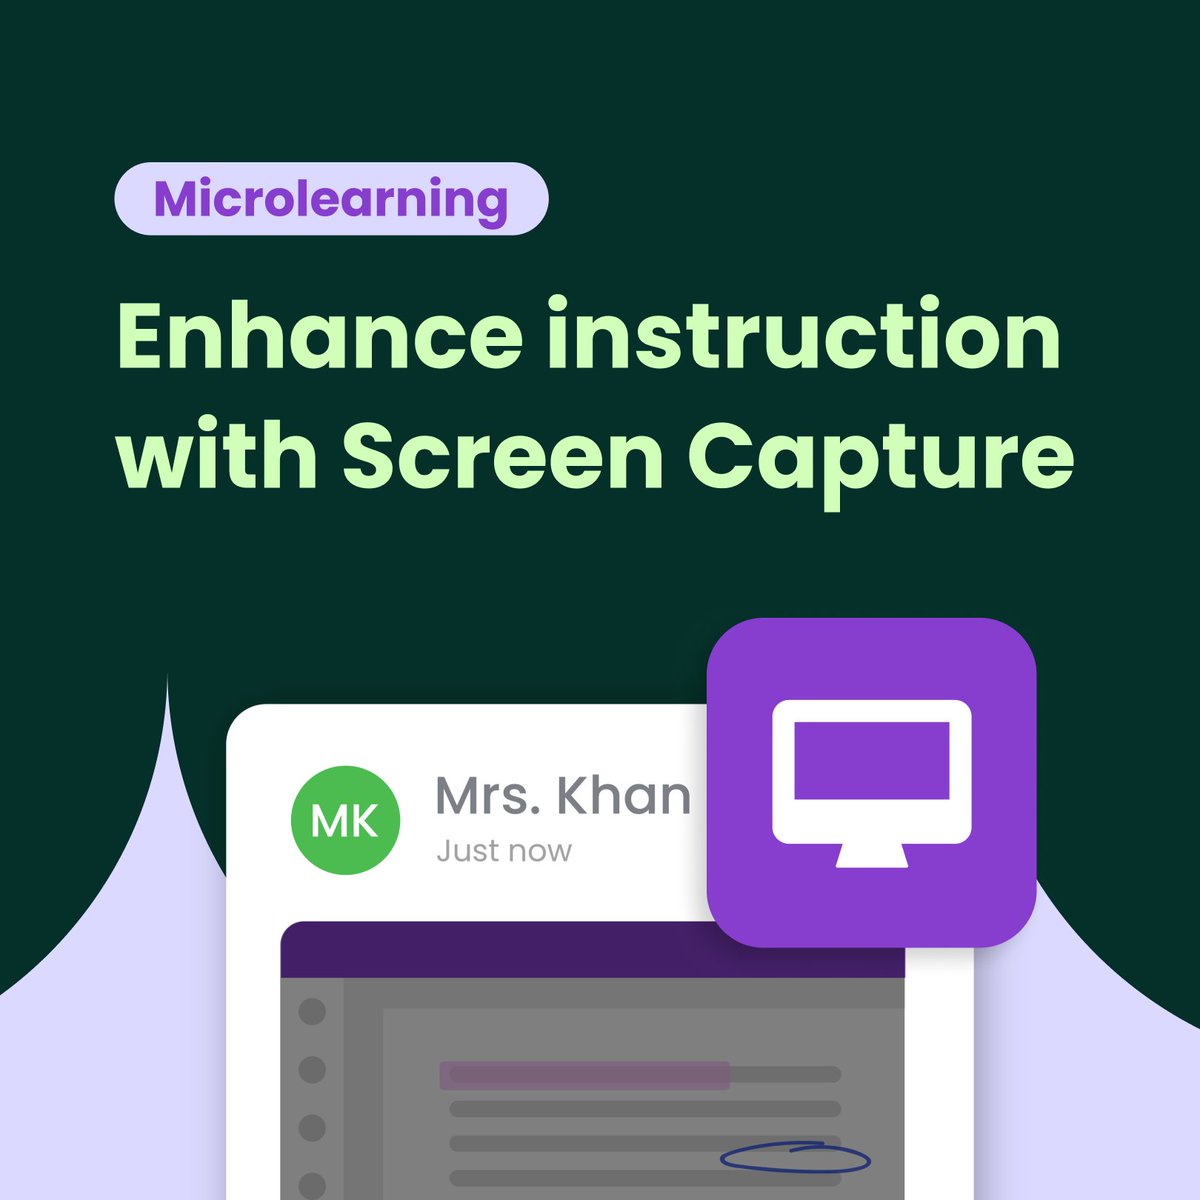 If a student is uncertain about a Kami tool, help is just a screen record away! Capture a quick demonstration to show them the ropes effortlessly. Learn more 👉 kami.app/QSV-C43-G3C-s1S